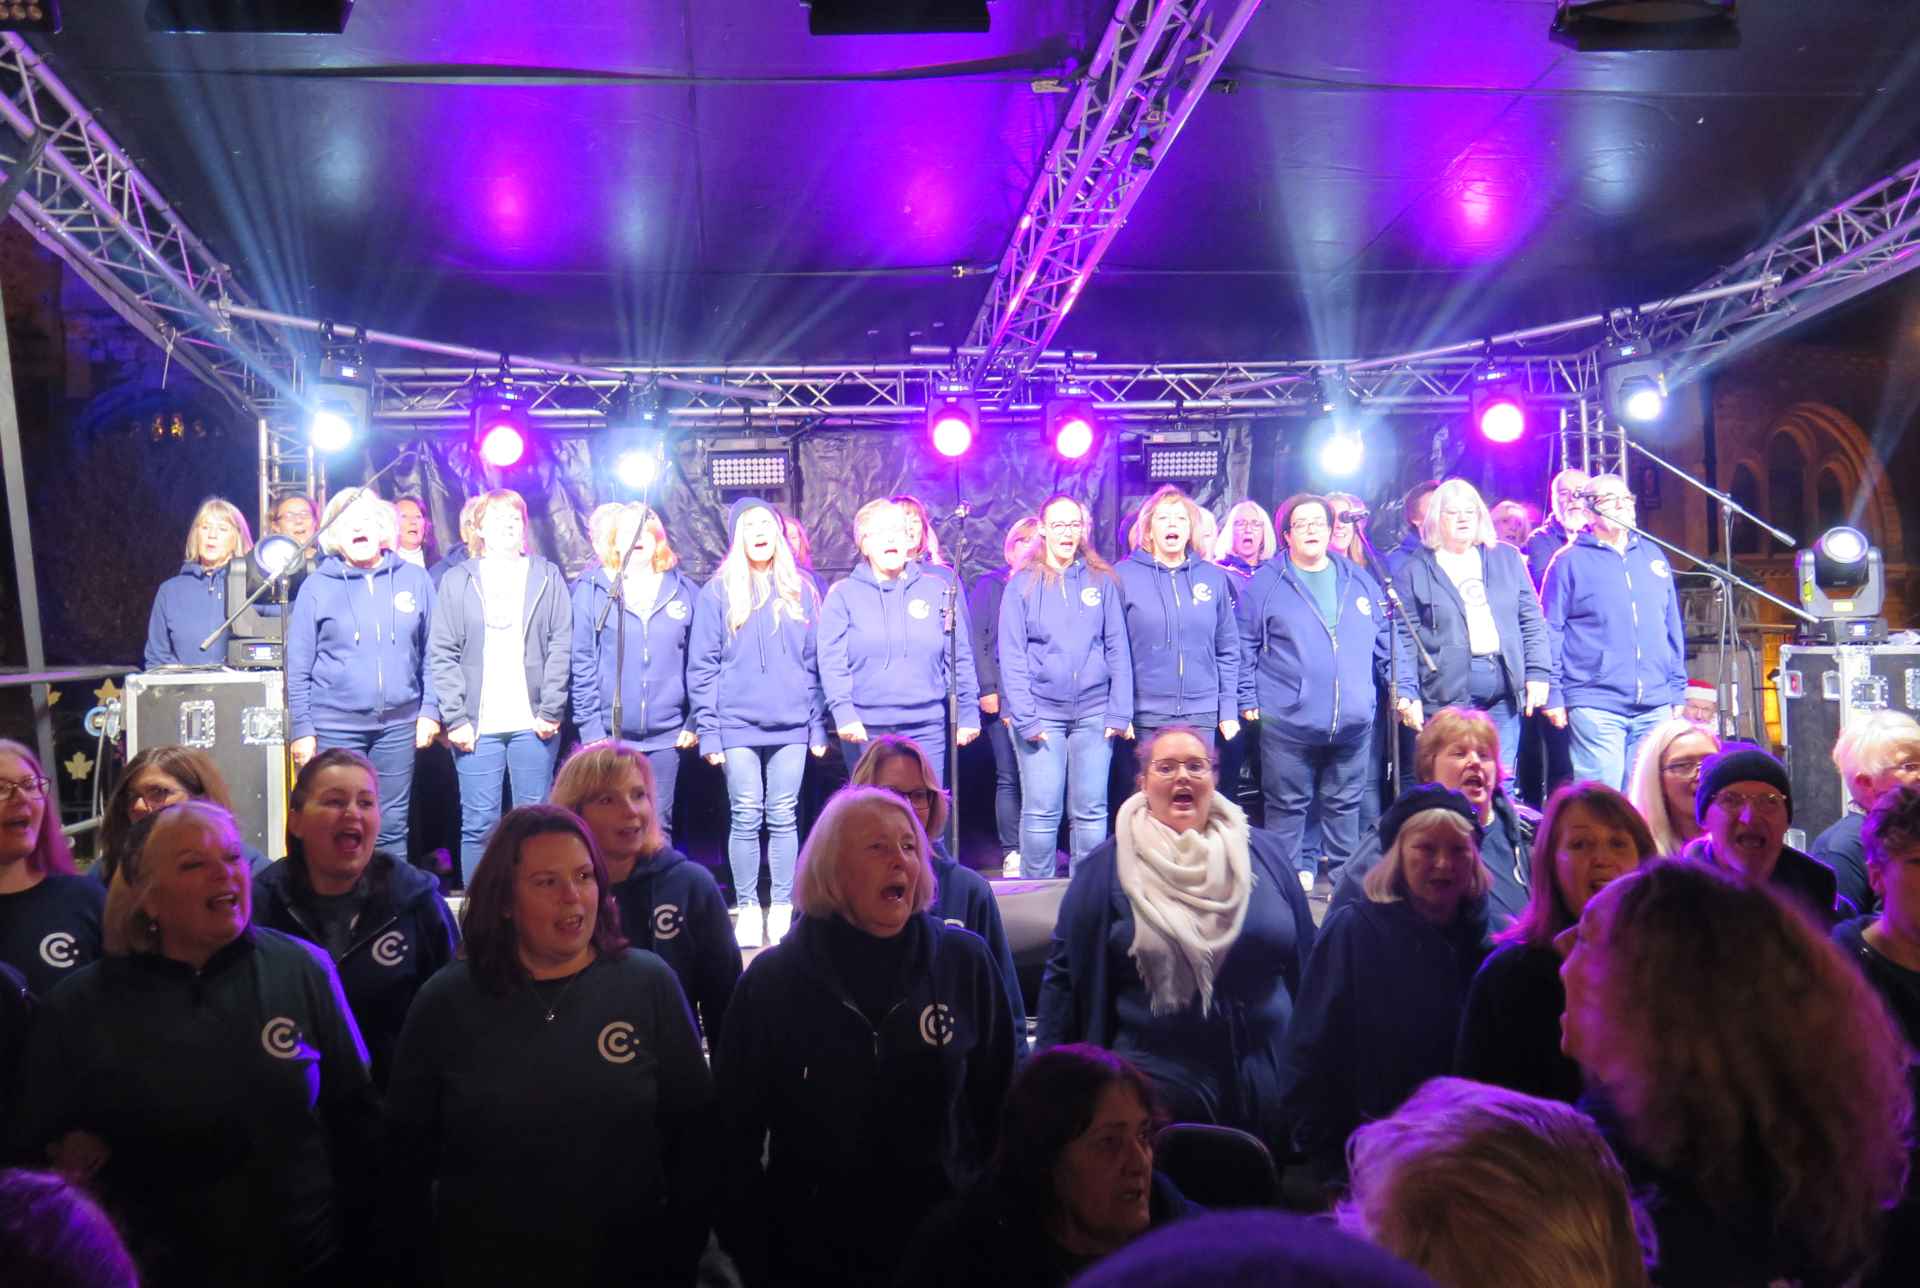 A picture of the Collaboration Choir on stage at Huntingdon Christmas Market. They are all singing passionately and brightly lit with blue an purple lights.  A large crowd watches them perform.